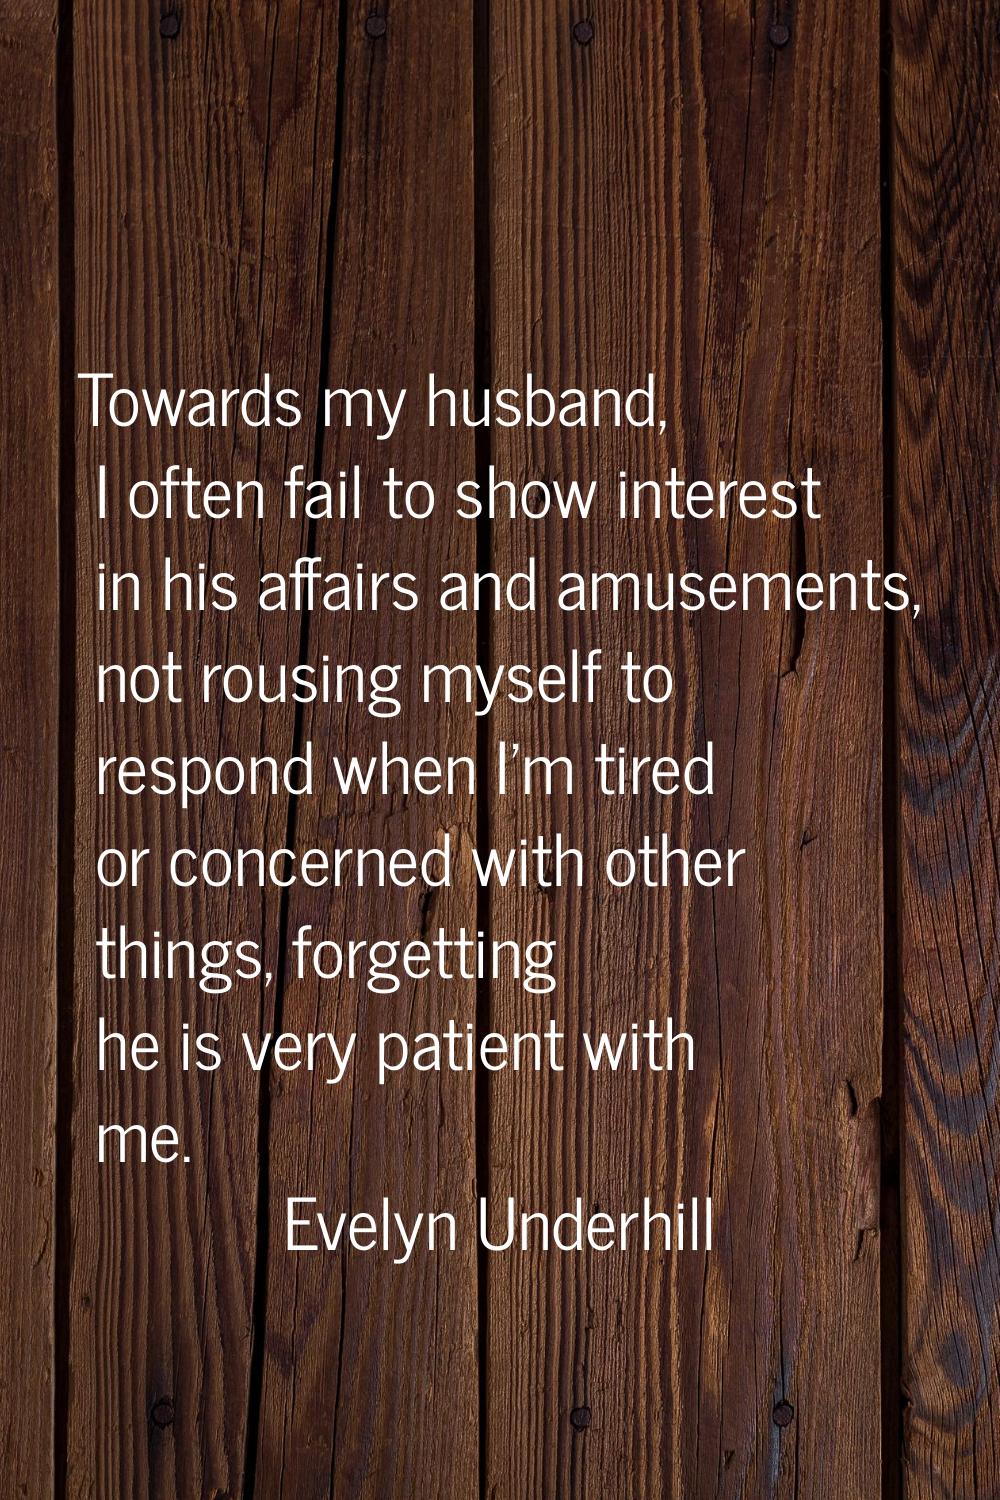 Towards my husband, I often fail to show interest in his affairs and amusements, not rousing myself